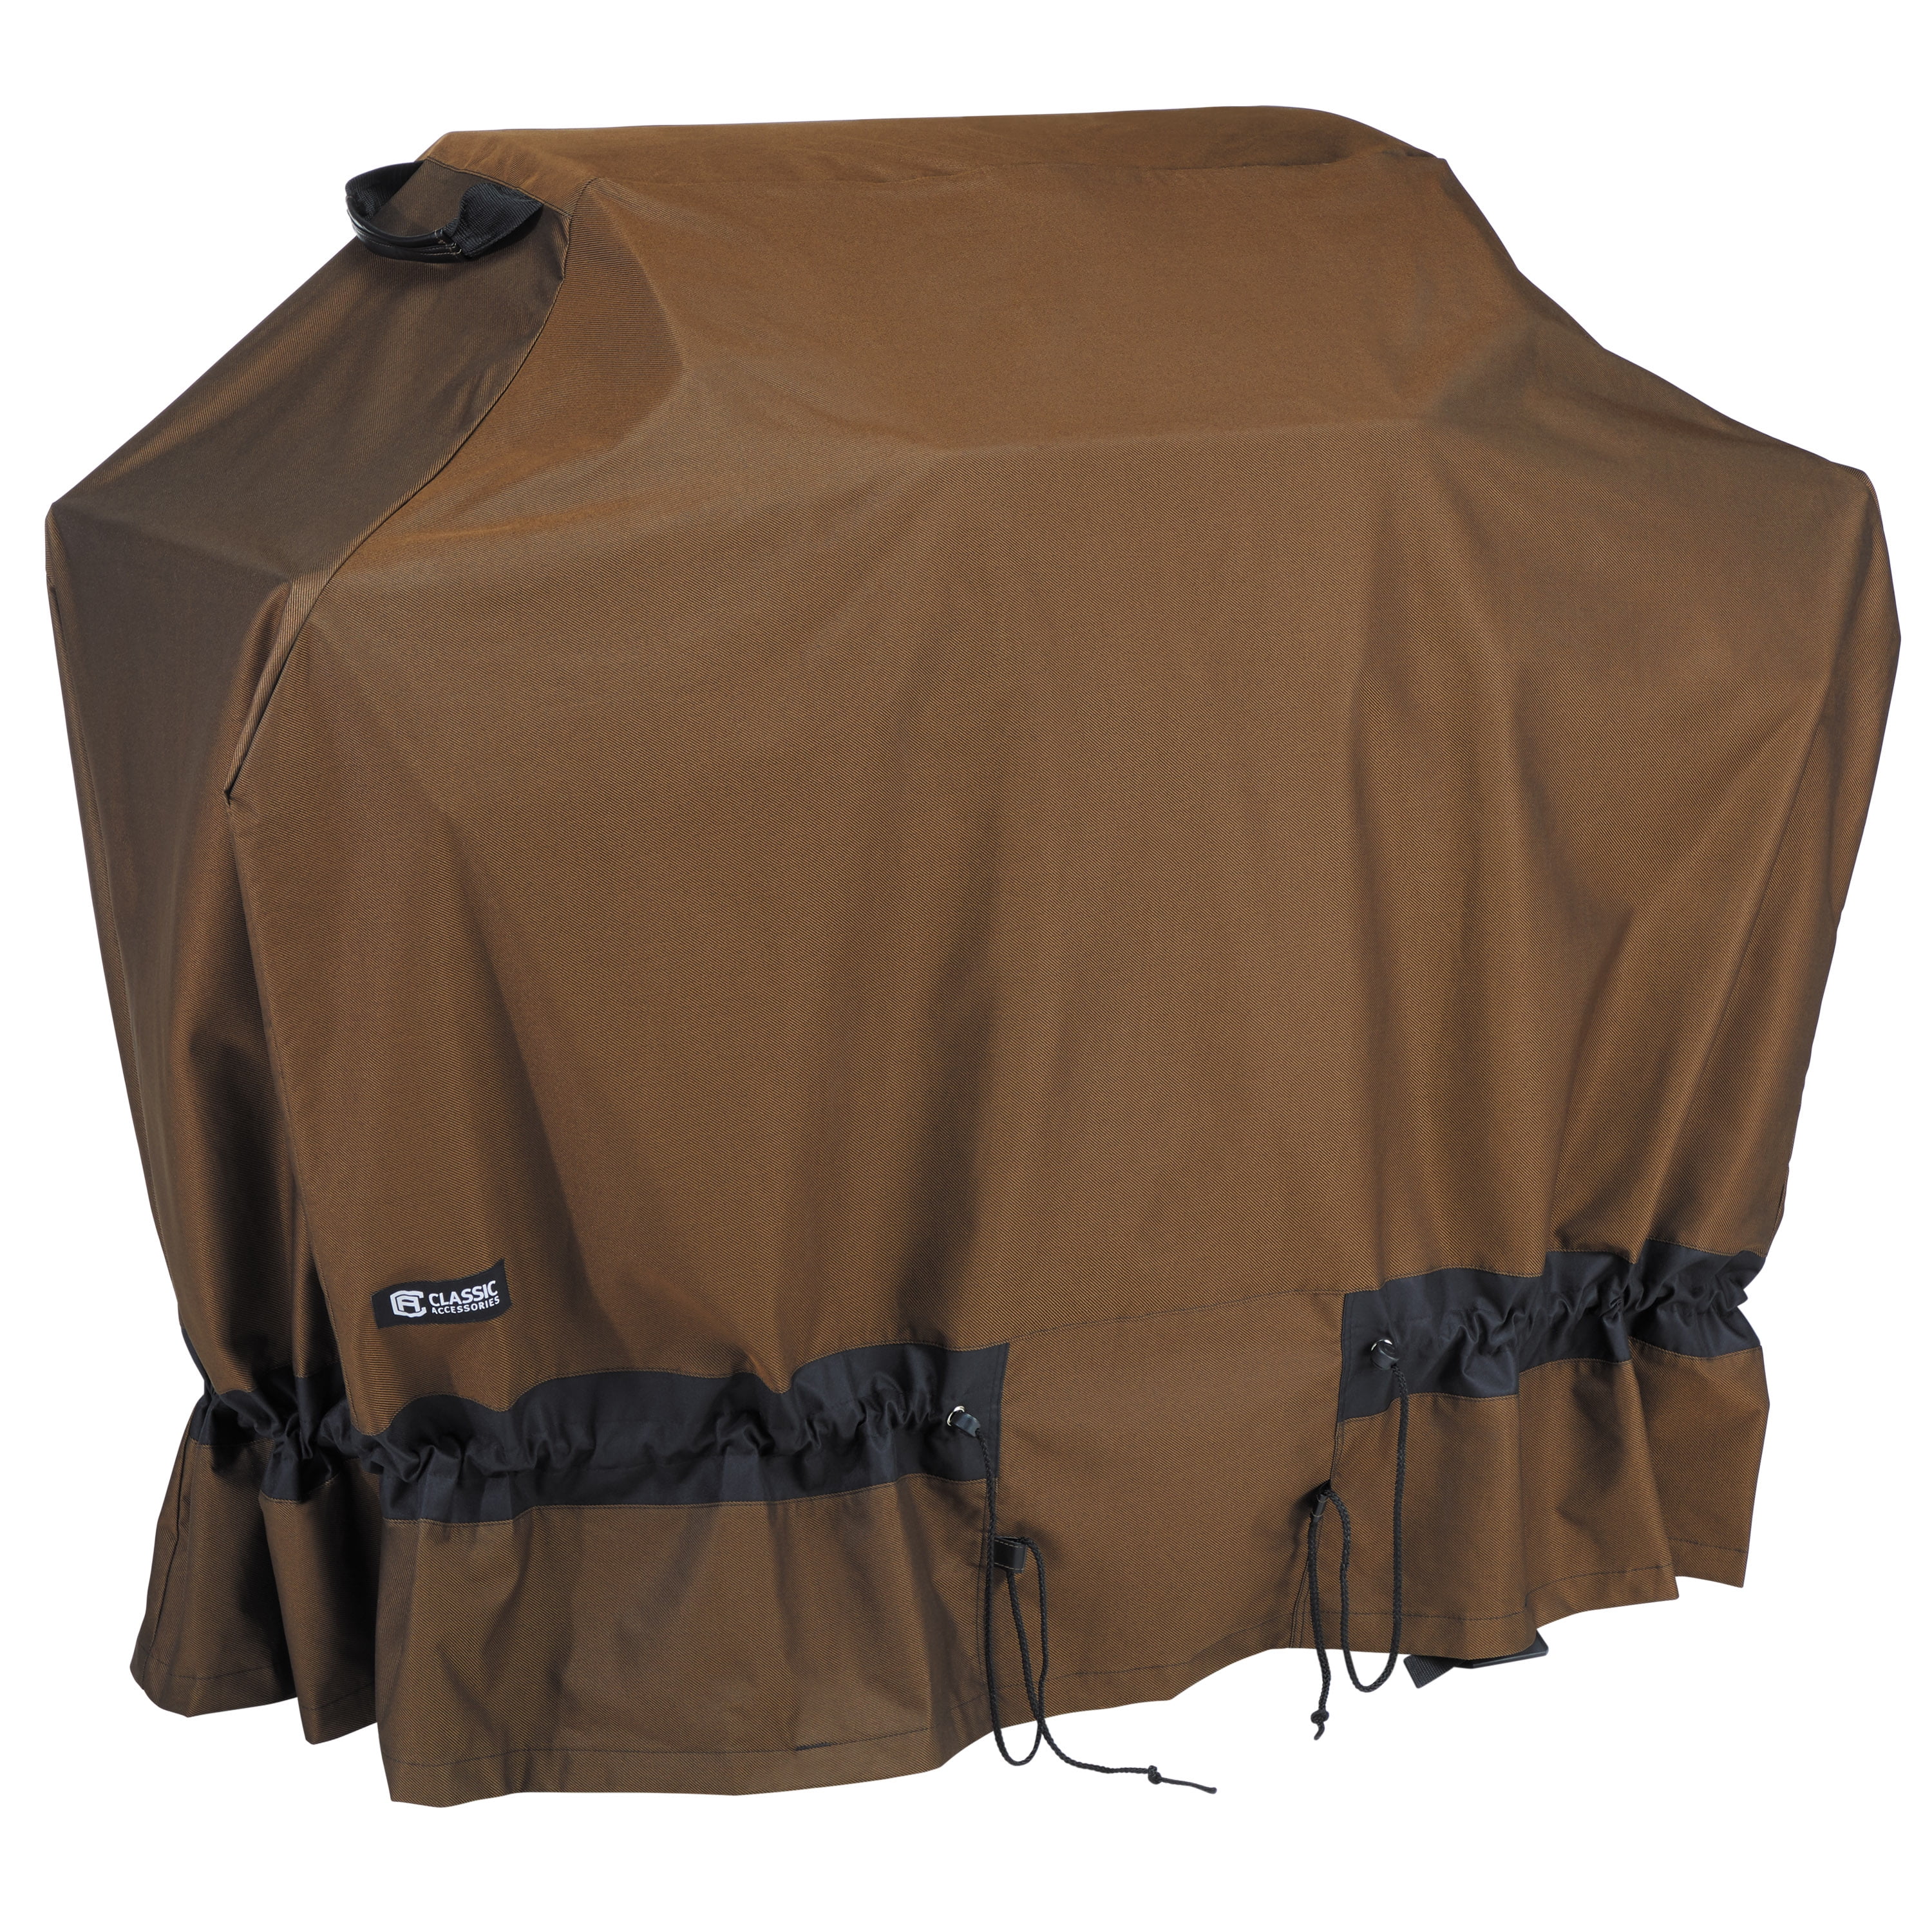 Classic Accessories Elkridge Water-Resistant 70 Inch BBQ Grill Cover